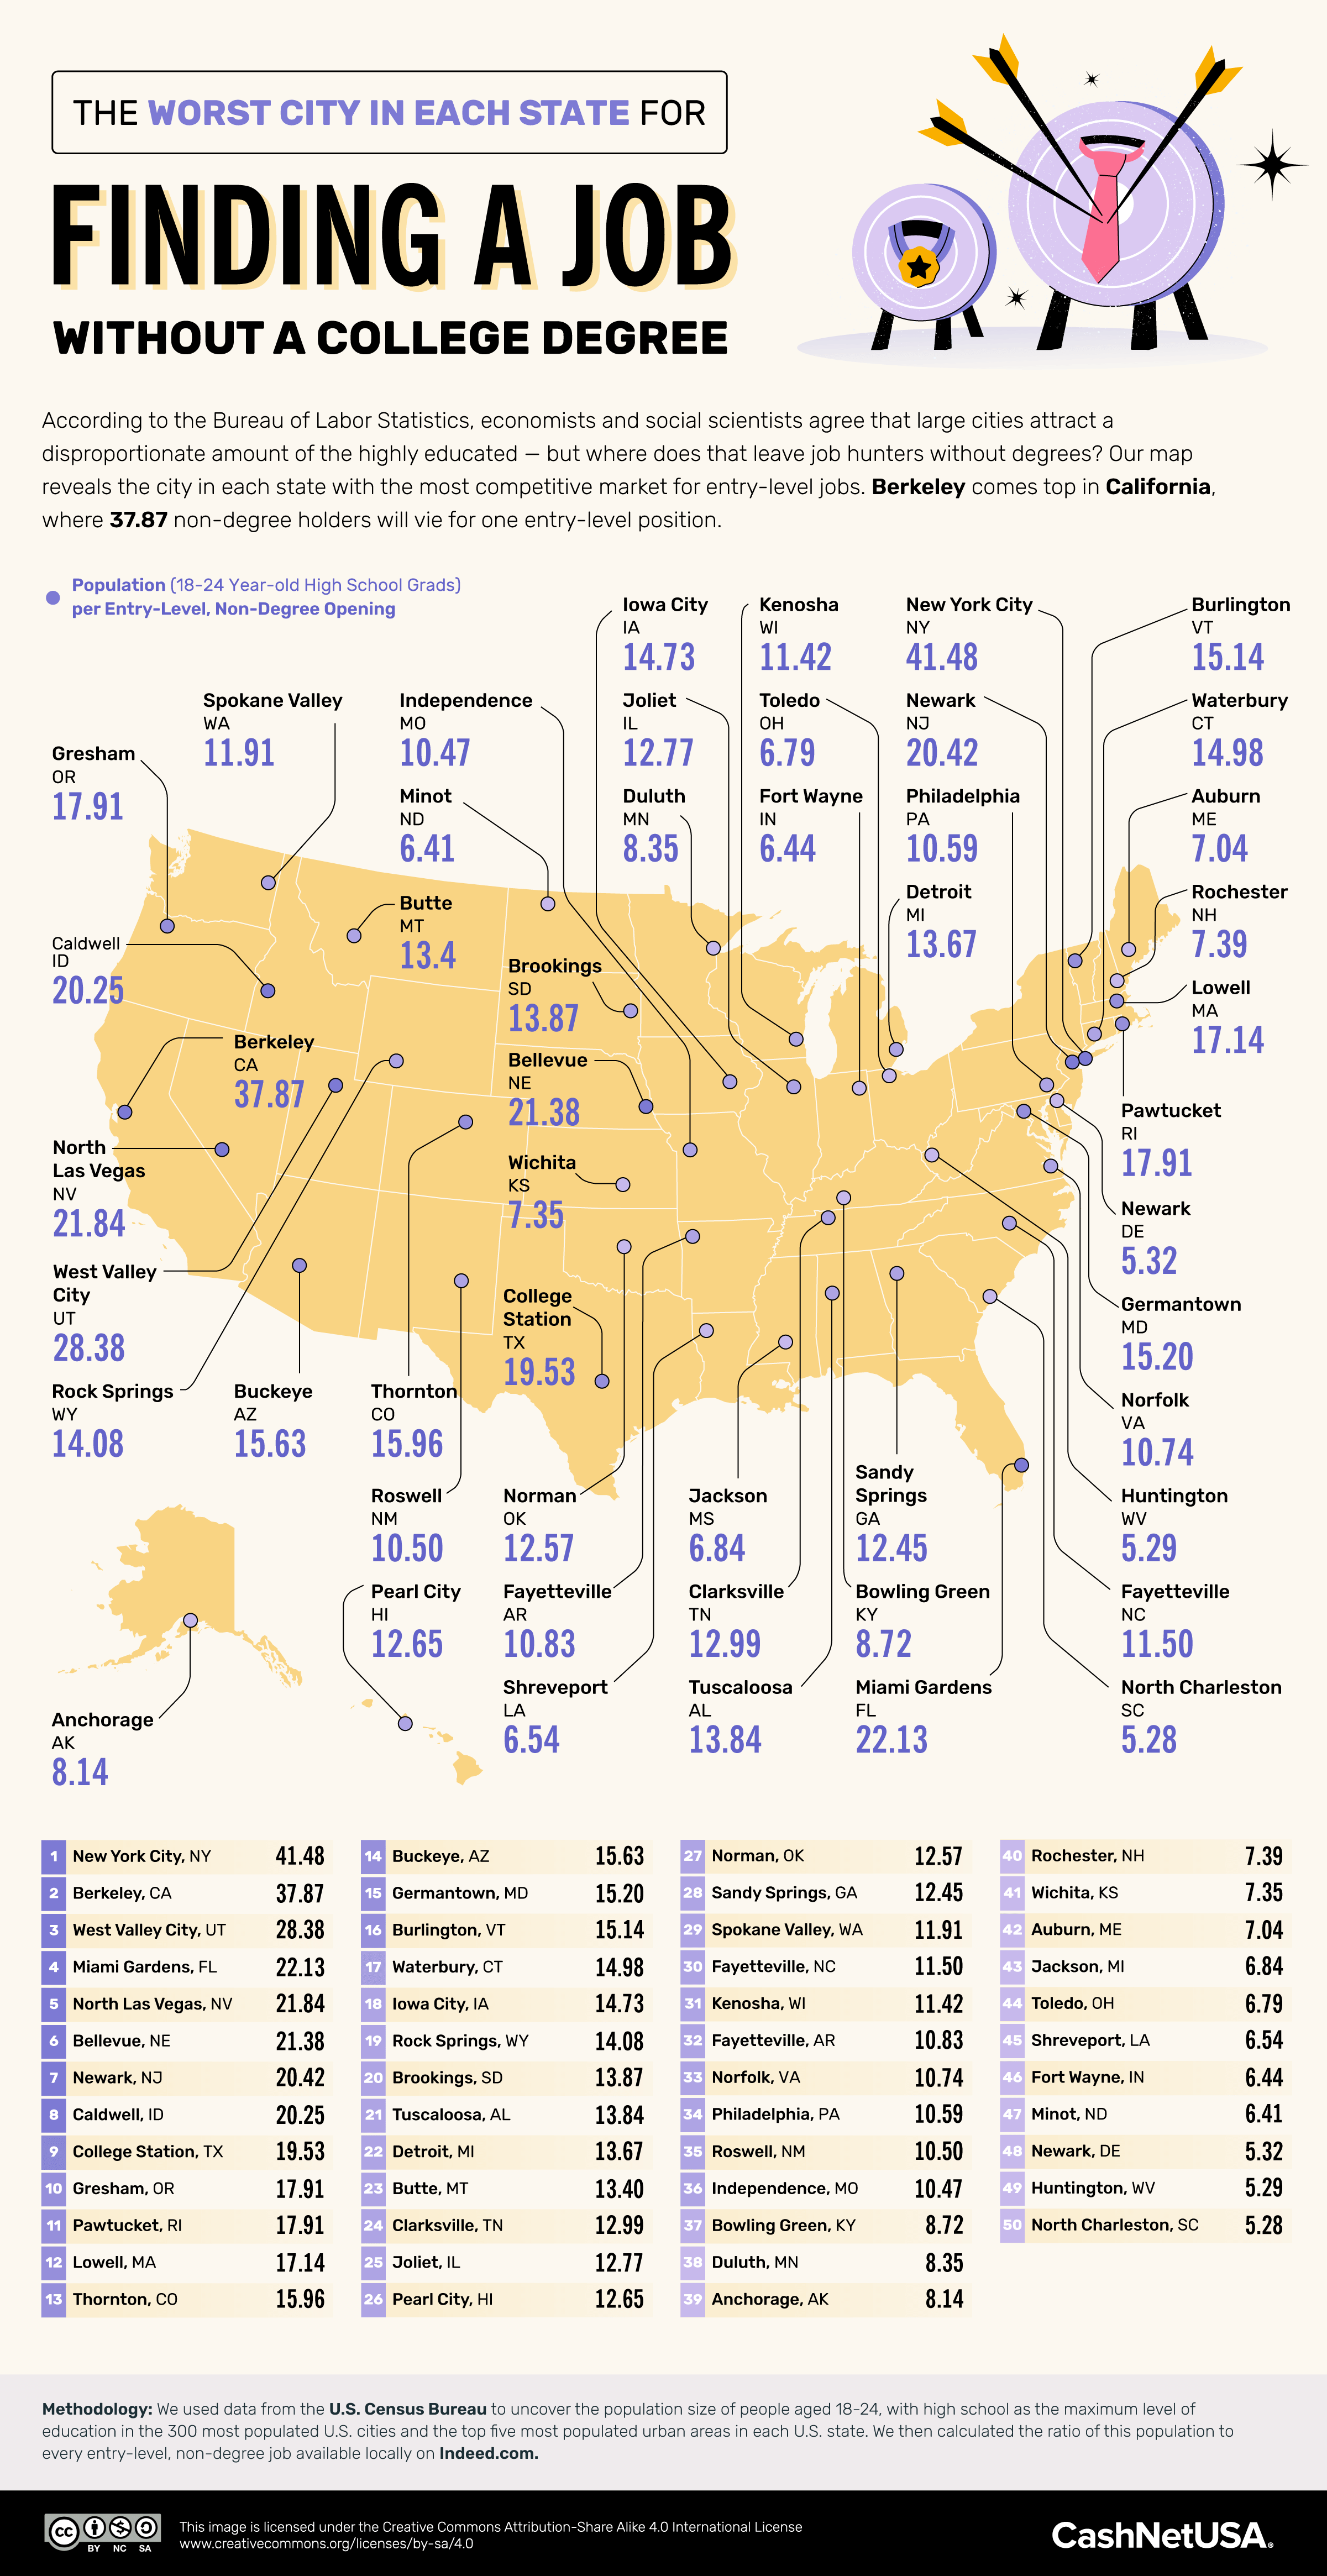 U.S. cities in each state with the most competitive job markets for non-degree holders